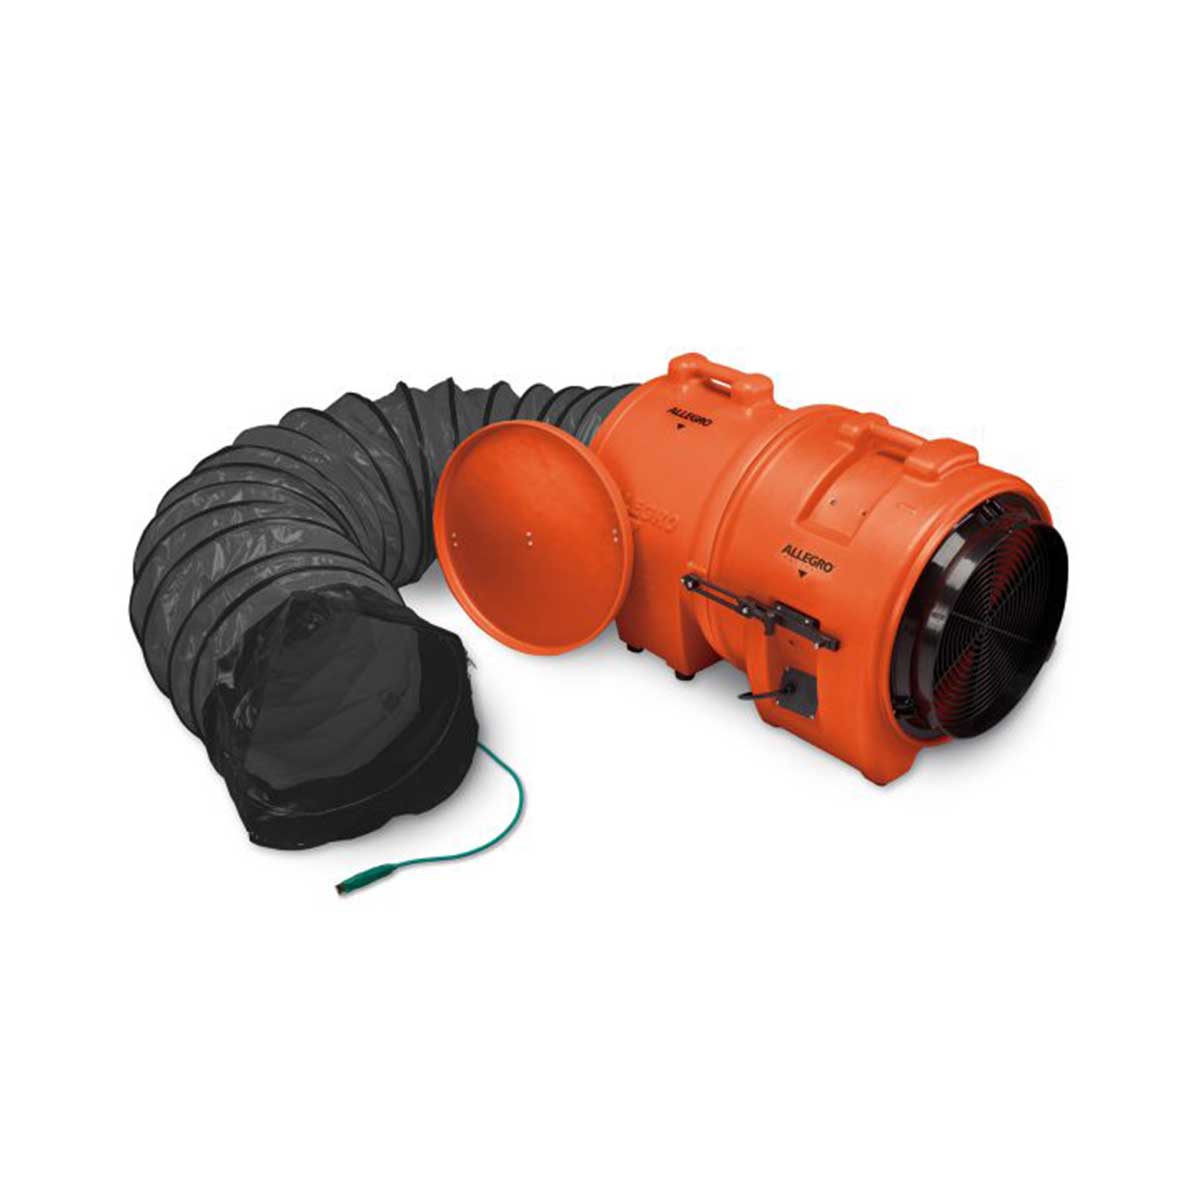 16″ Axial Explosion-Proof (EX) Plastic Blower w/ Canister & 25′ Ducting. Part: ALL-9558-25. Pkg: 1